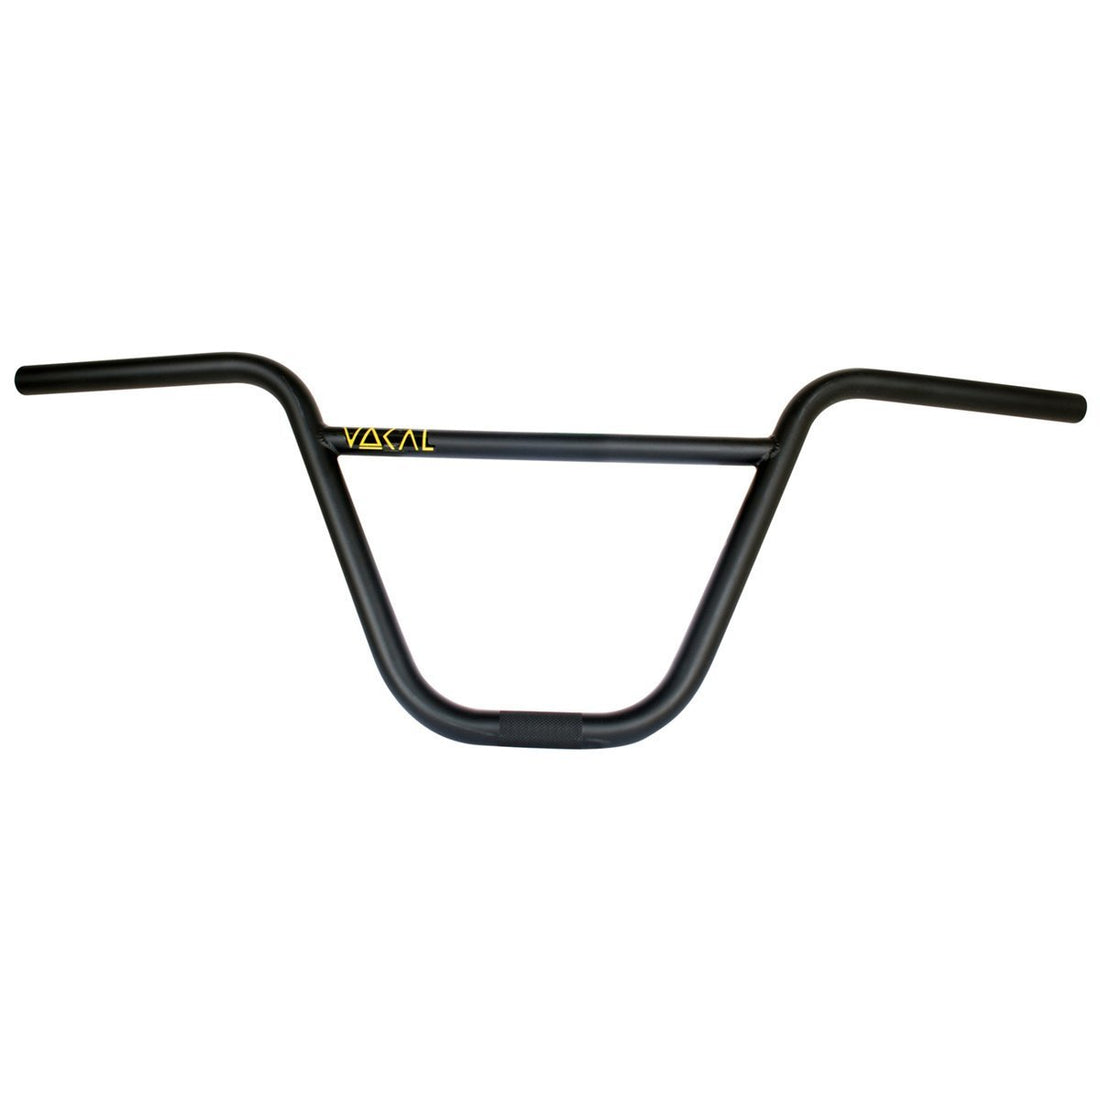 Vocal Abyss BMX Bars at 46.99. Quality Handlebars from Waller BMX.